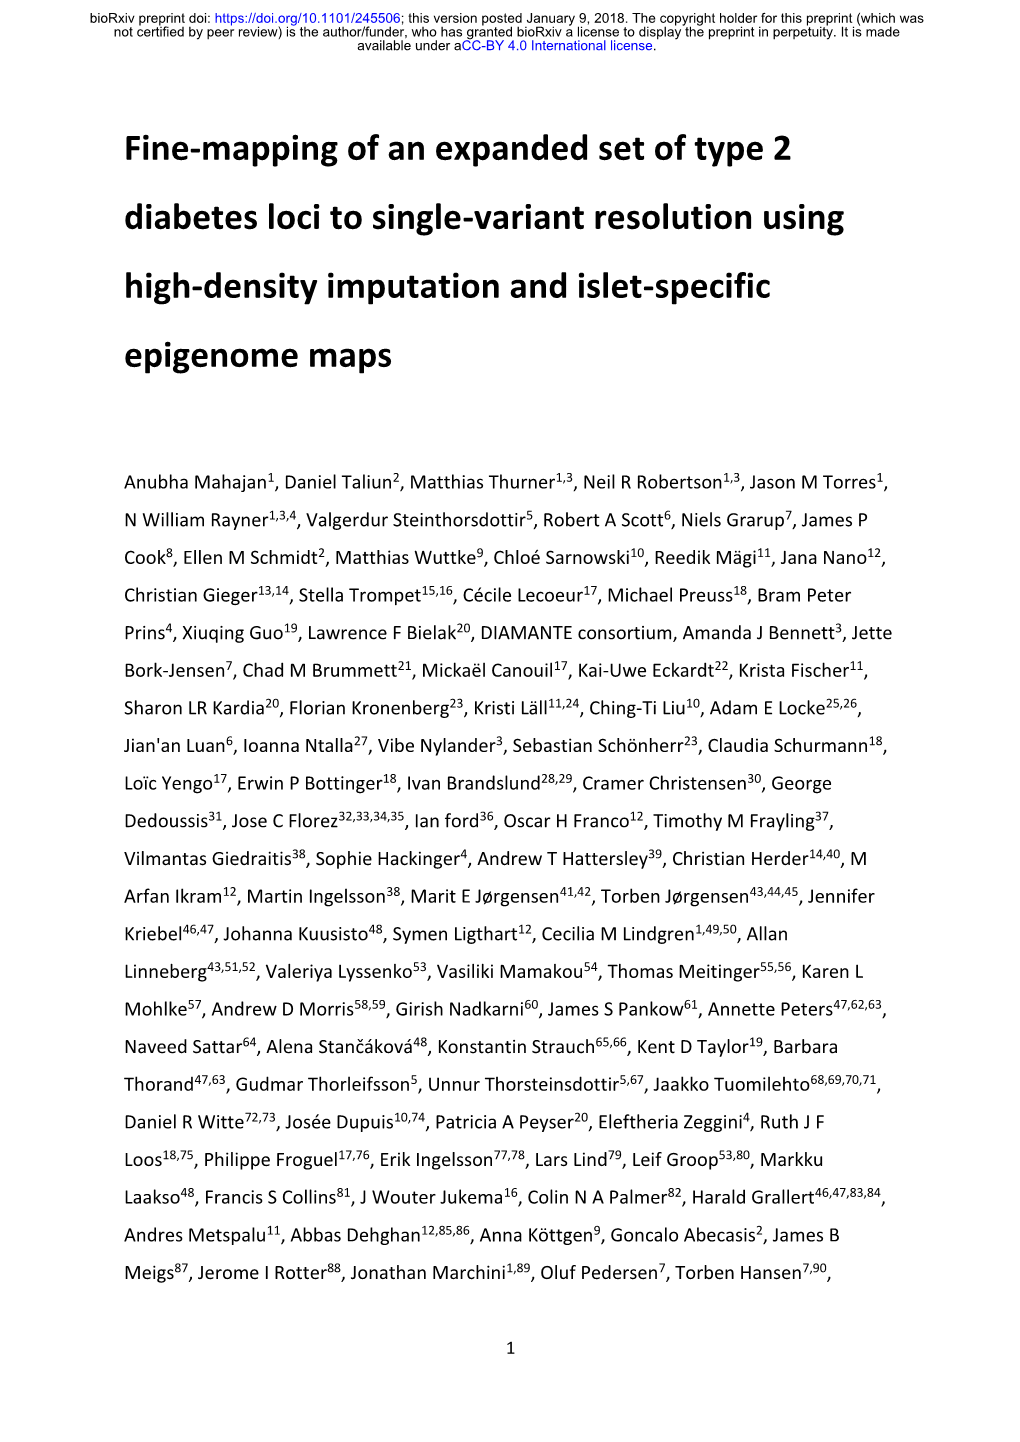 Fine-Mapping of an Expanded Set of Type 2 Diabetes Loci to Single-Variant Resolution Using High-Density Imputation and Islet-Specific Epigenome Maps